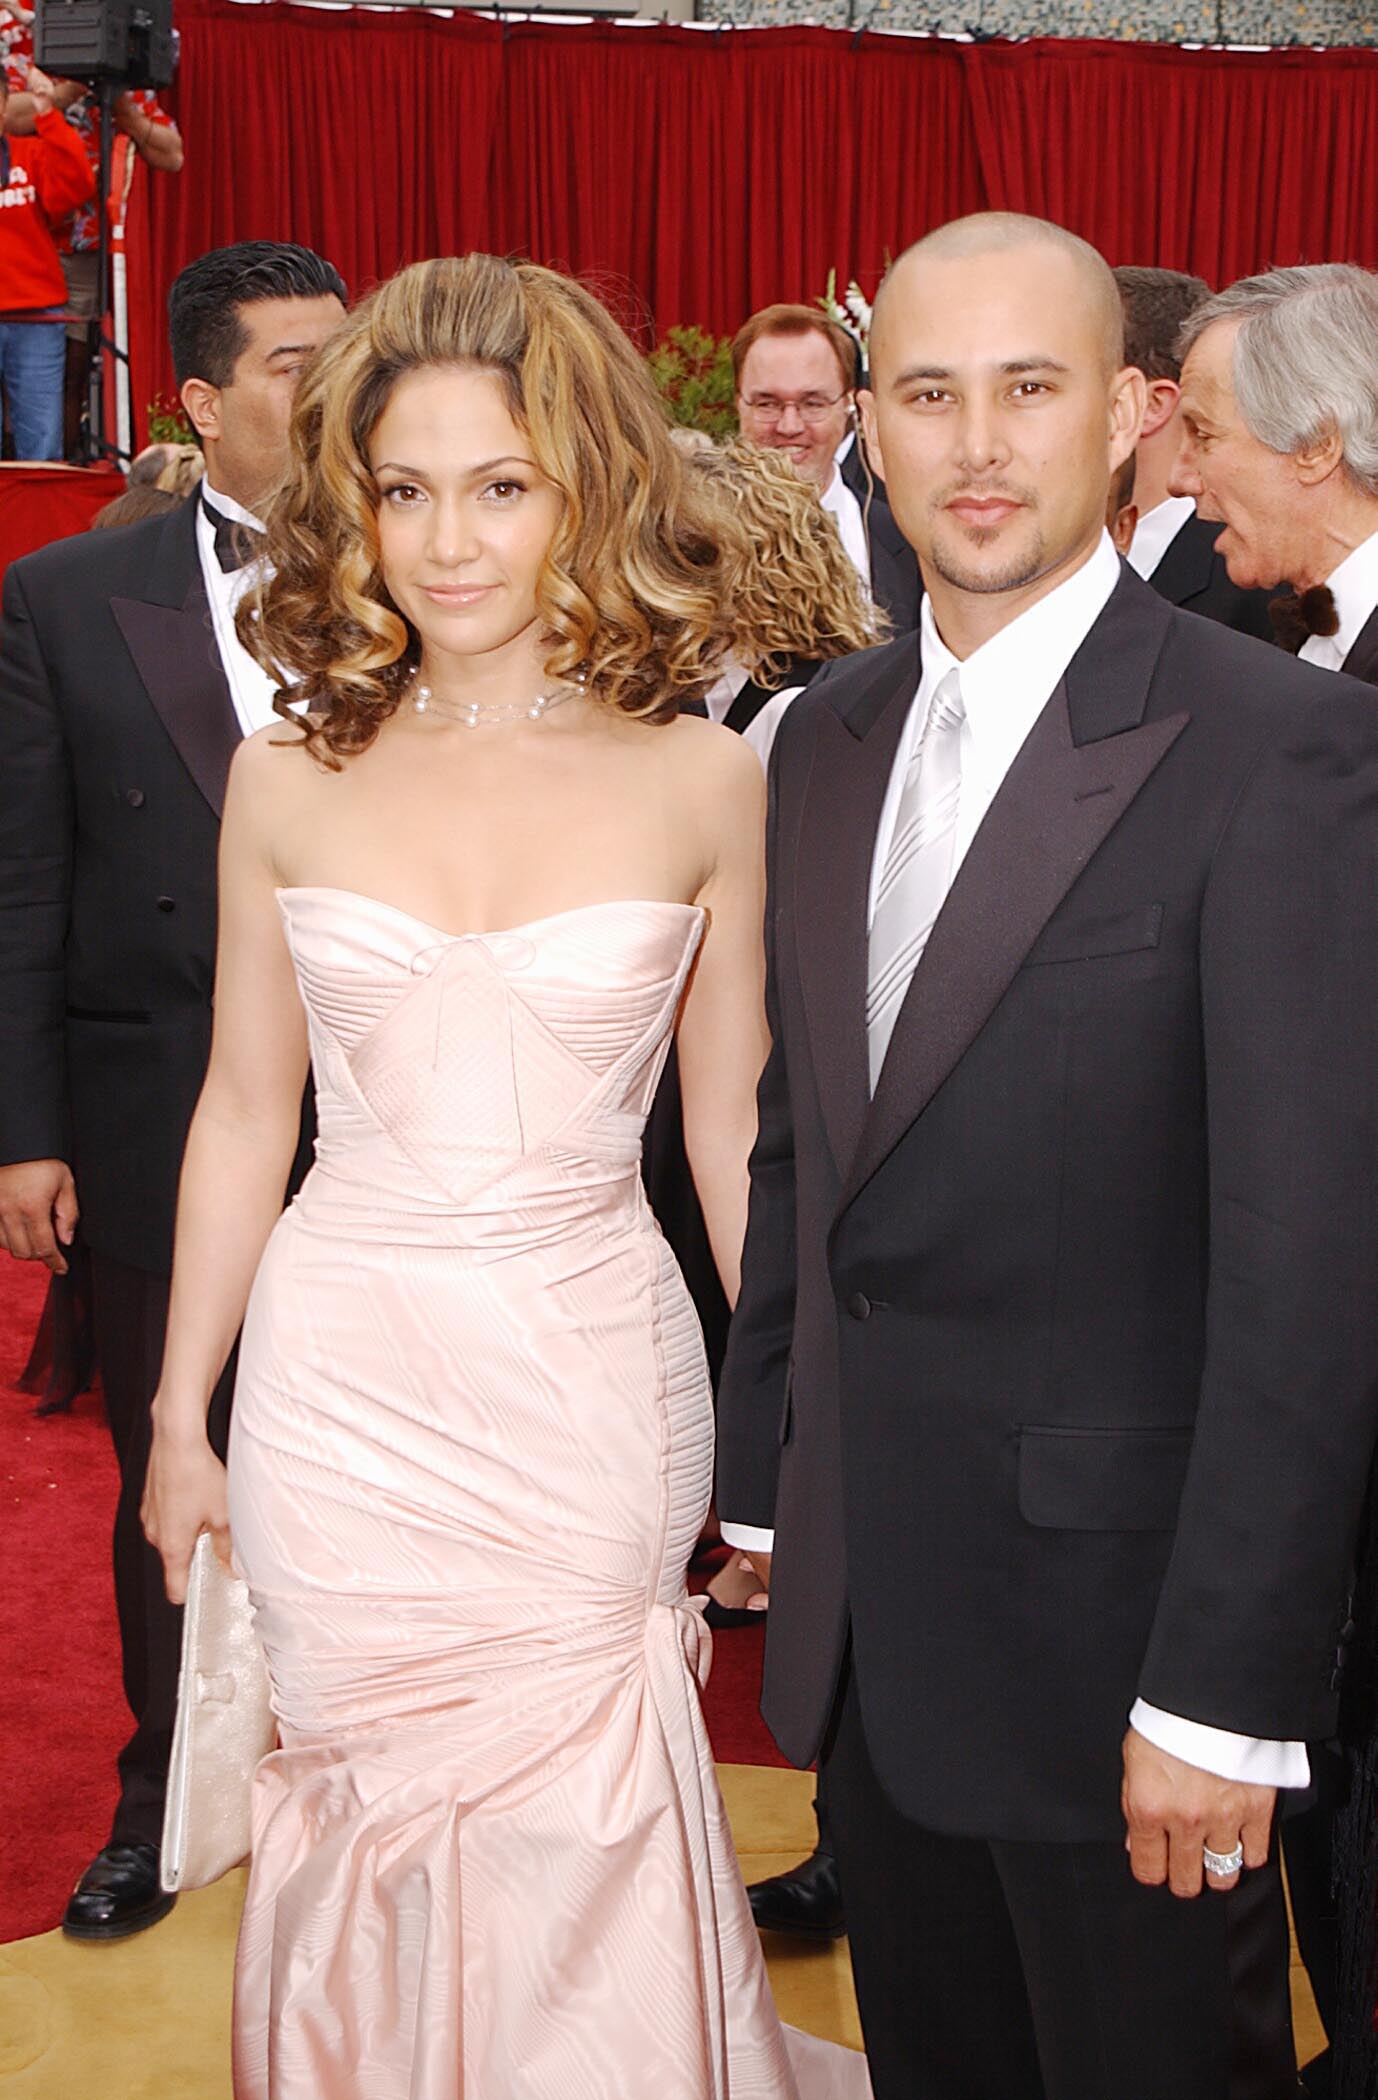 Jennifer Lopez and Cris Judd at the 74th Annual Academy Awards in Hollywood, California, on March 24, 2002. | Source: Getty Images